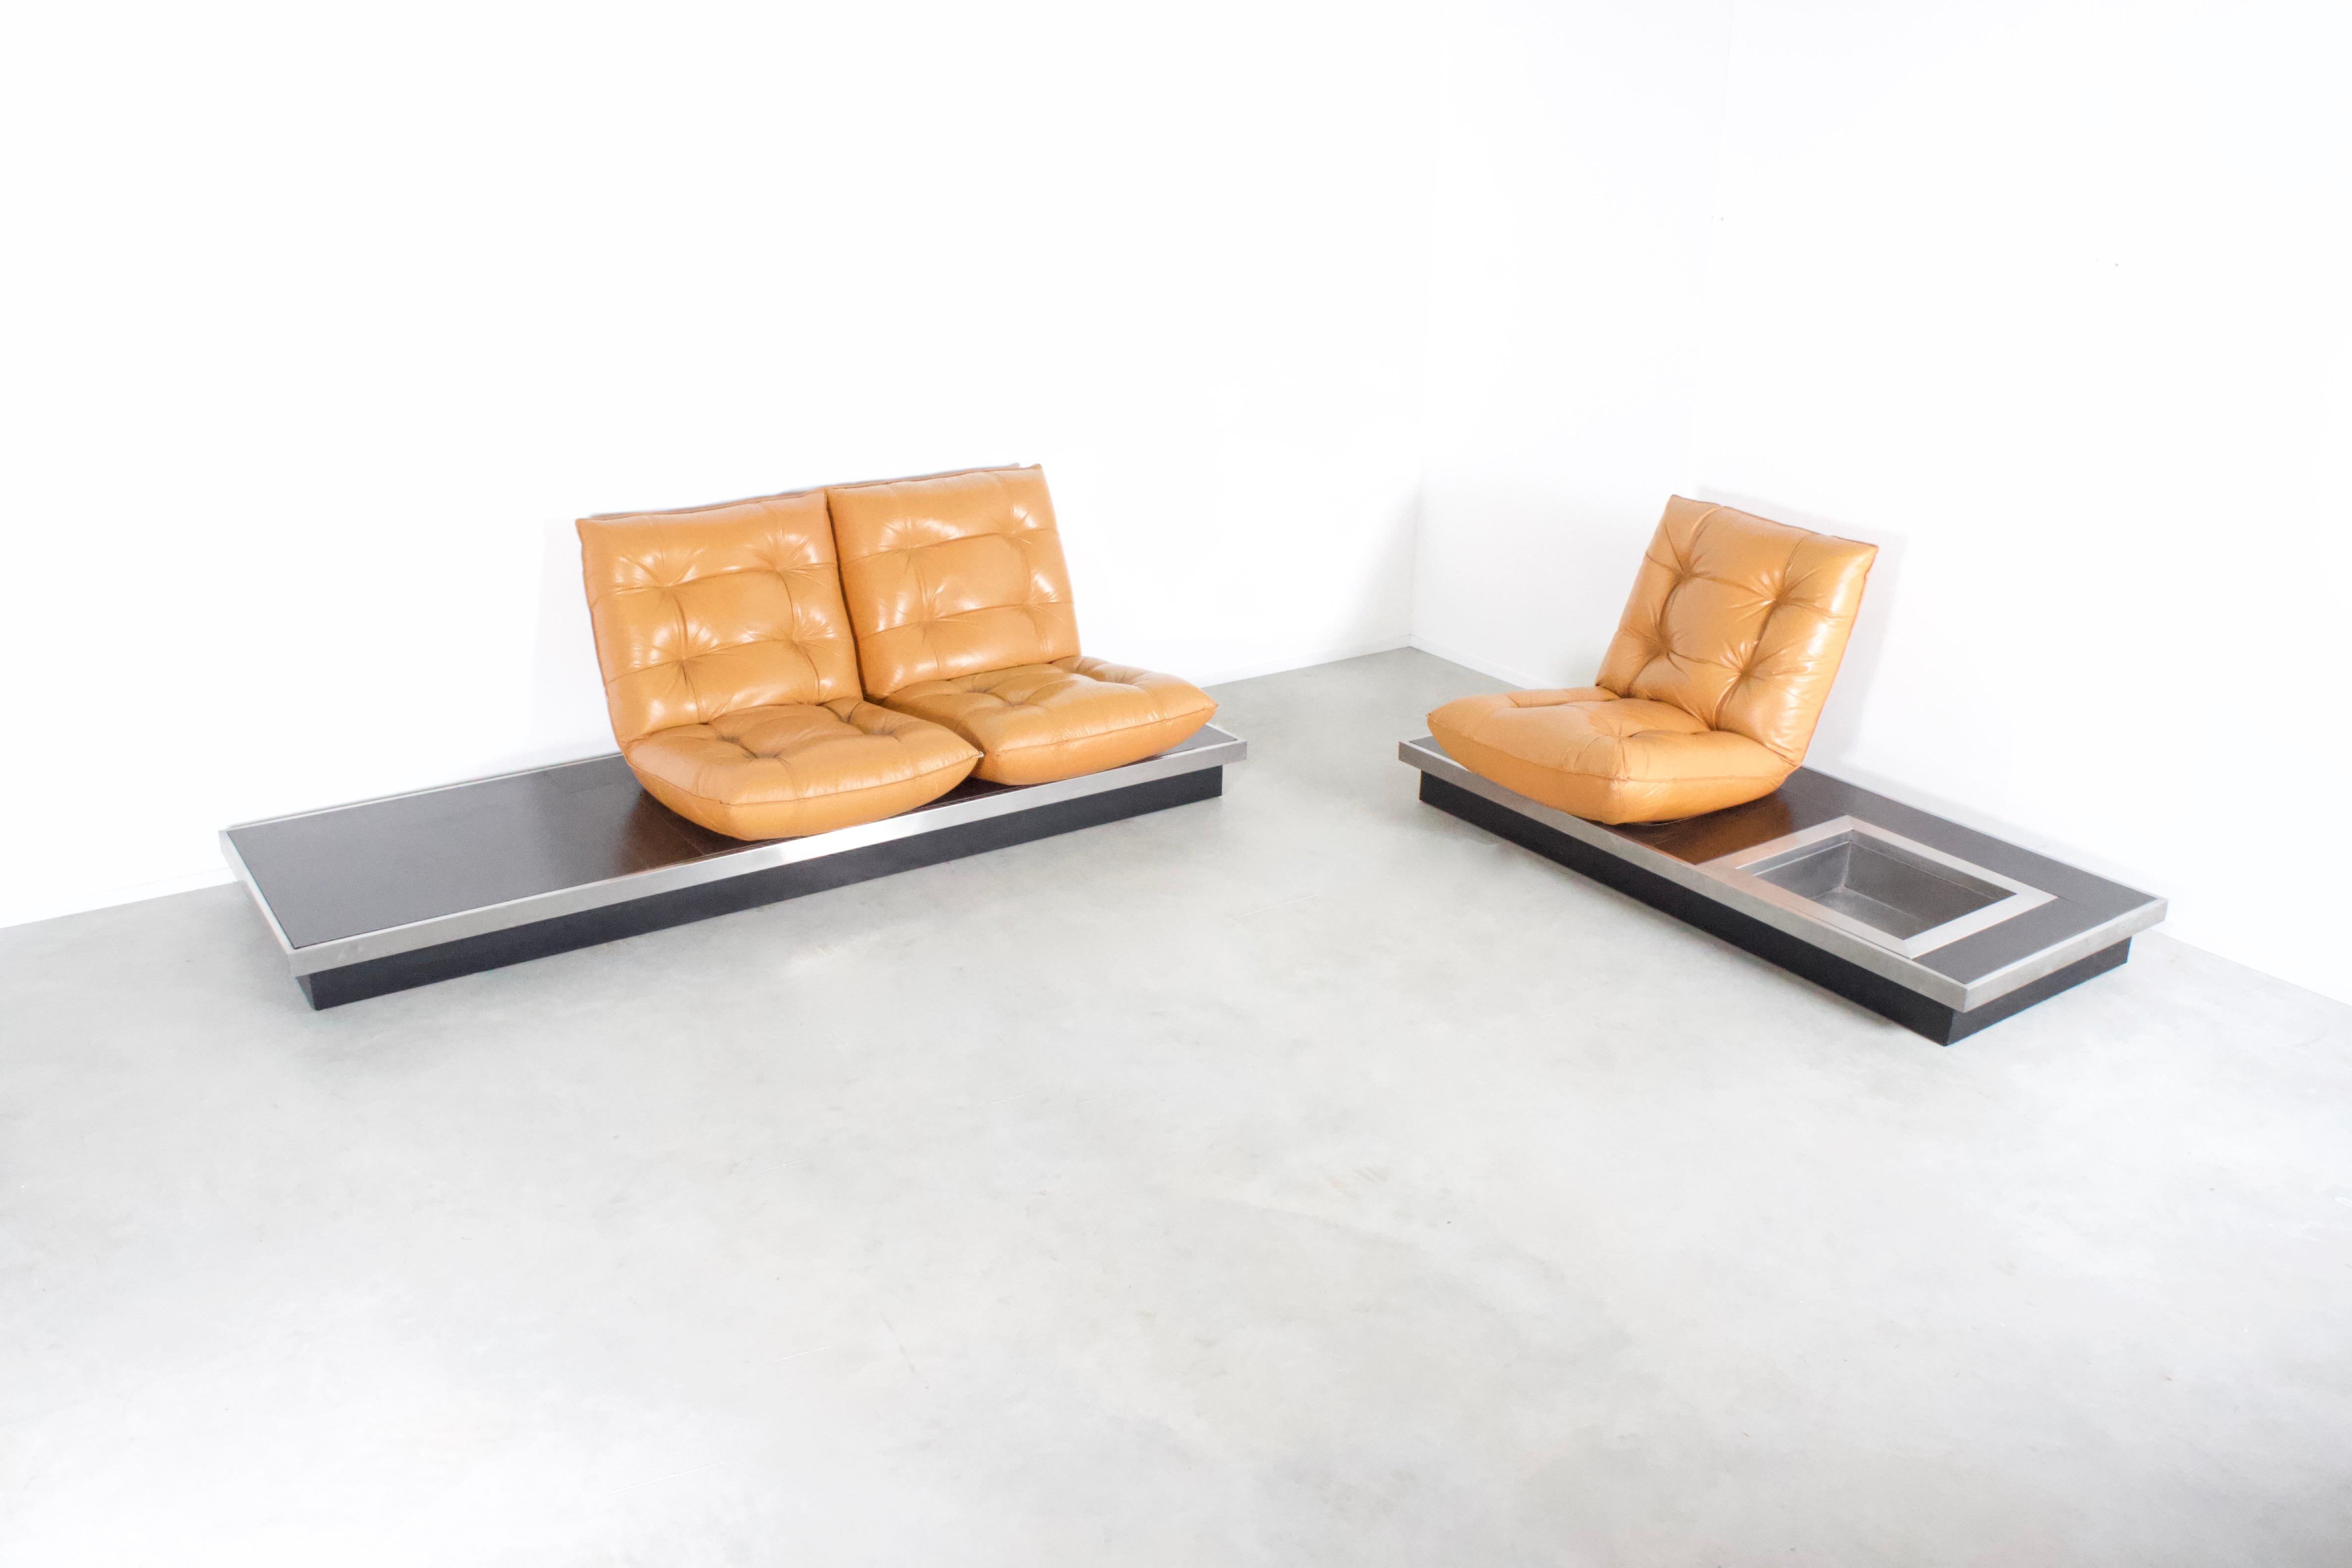 Stainless Steel Ultra Rare Michel Ducaroy Platform Sofas in Cognac Leather, 1970s